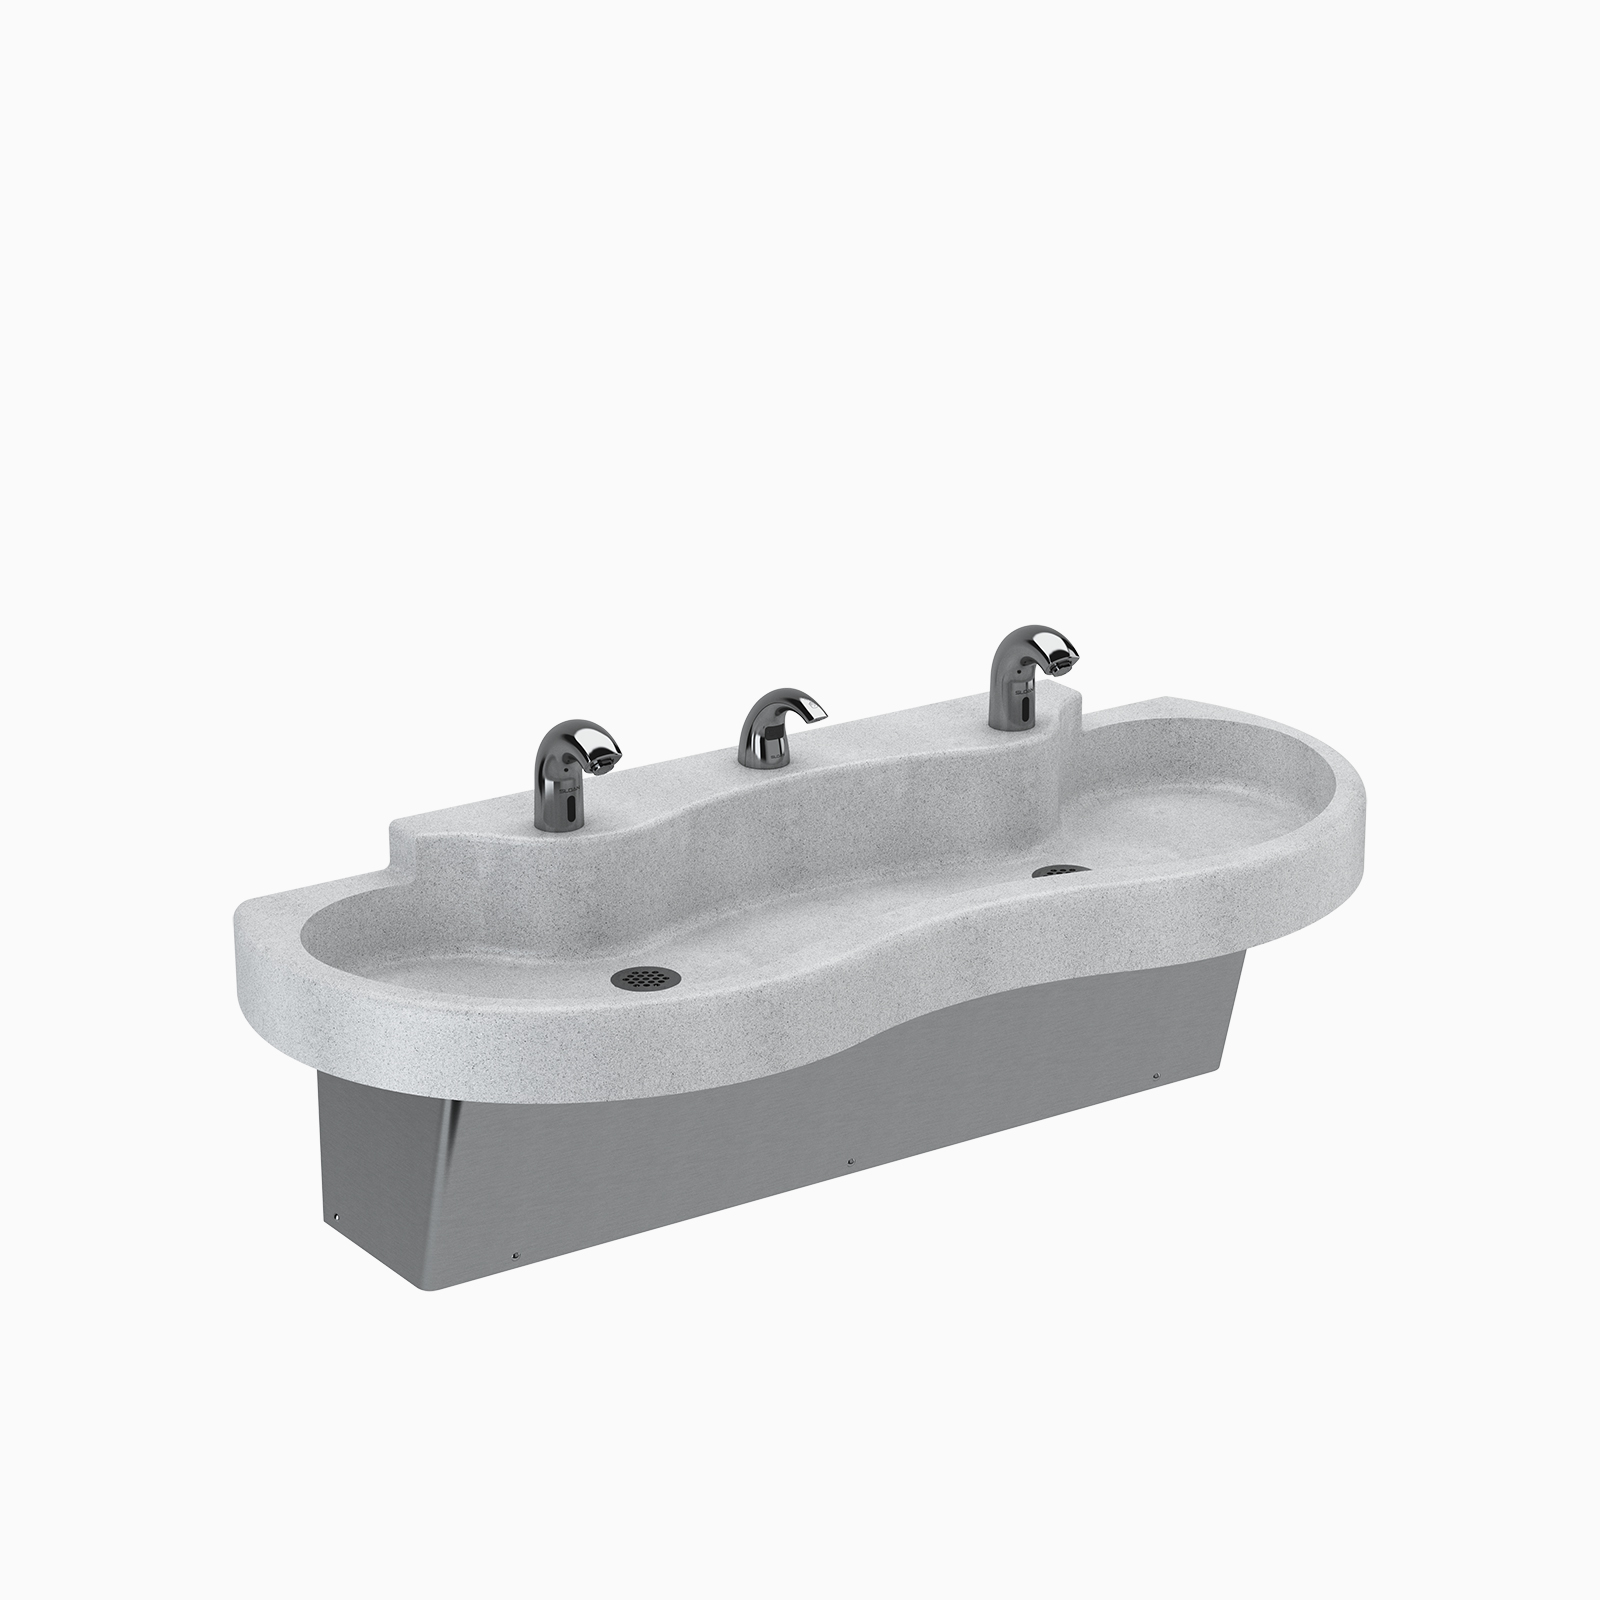 ESS-2100 Stainless Steel 1-Station Wall-Mounted Scrub Sink – Sloan